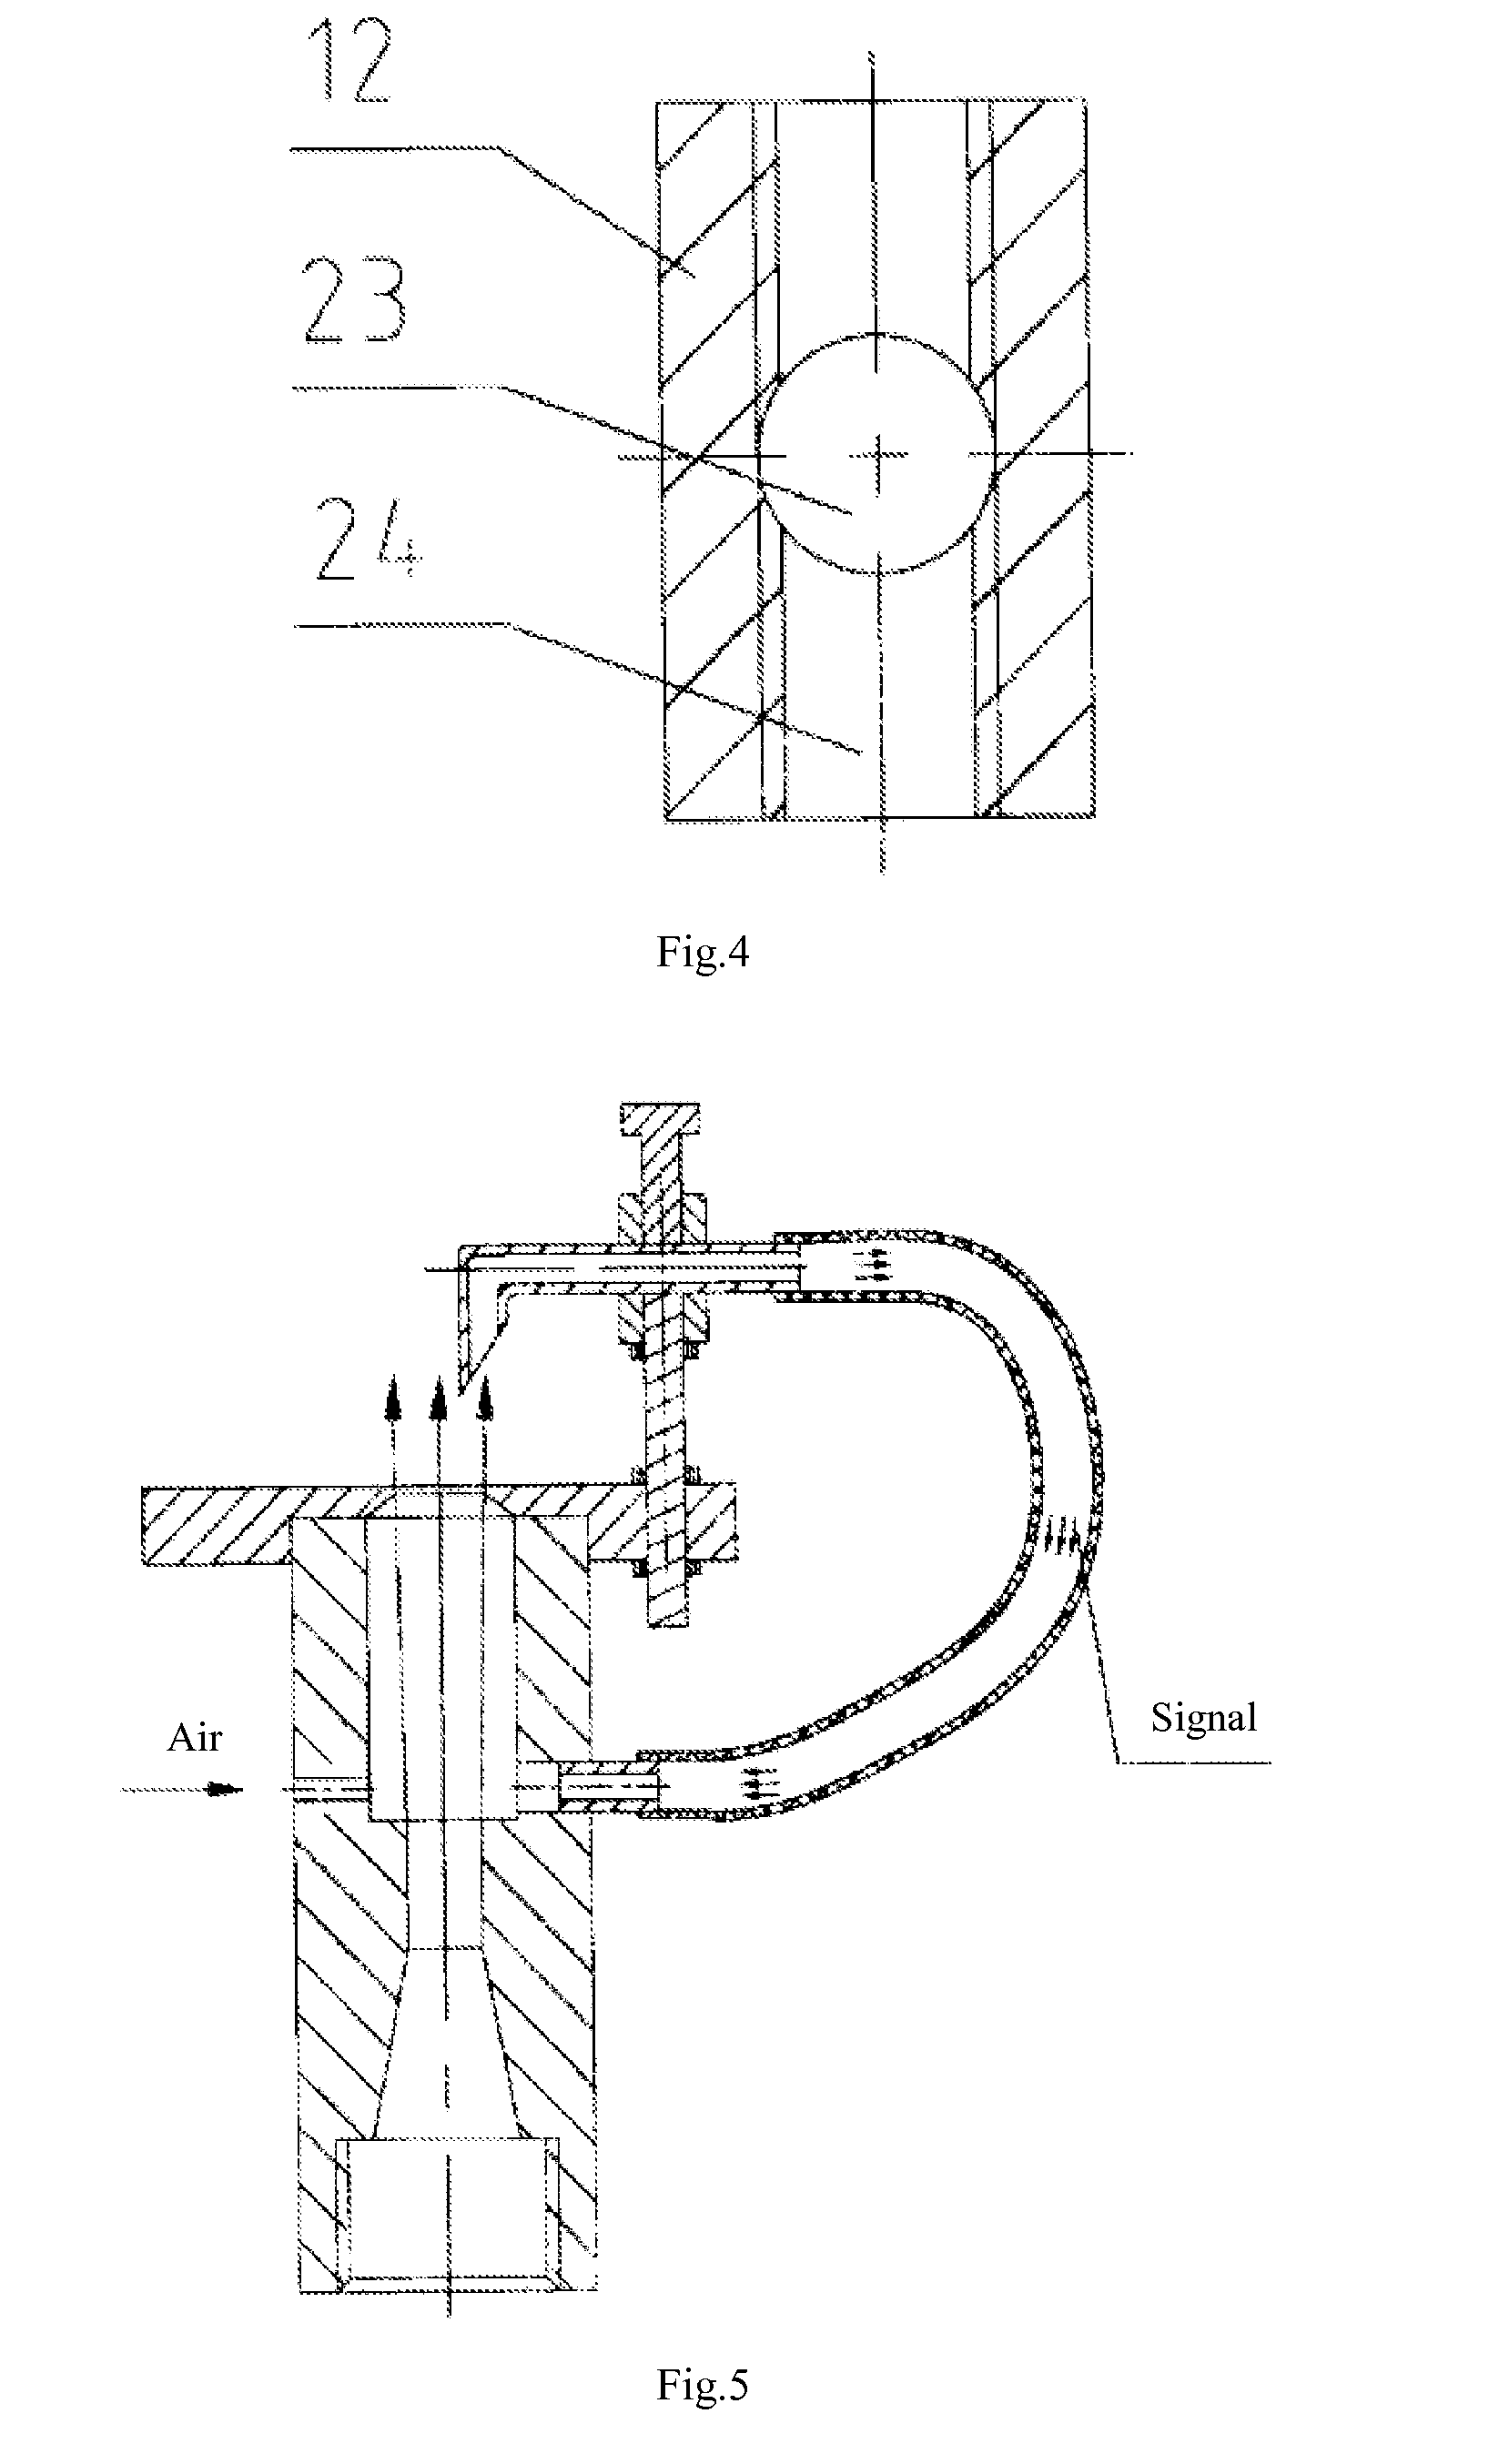 Double-nozzle injector capable of spraying evenly at medium and low pressure